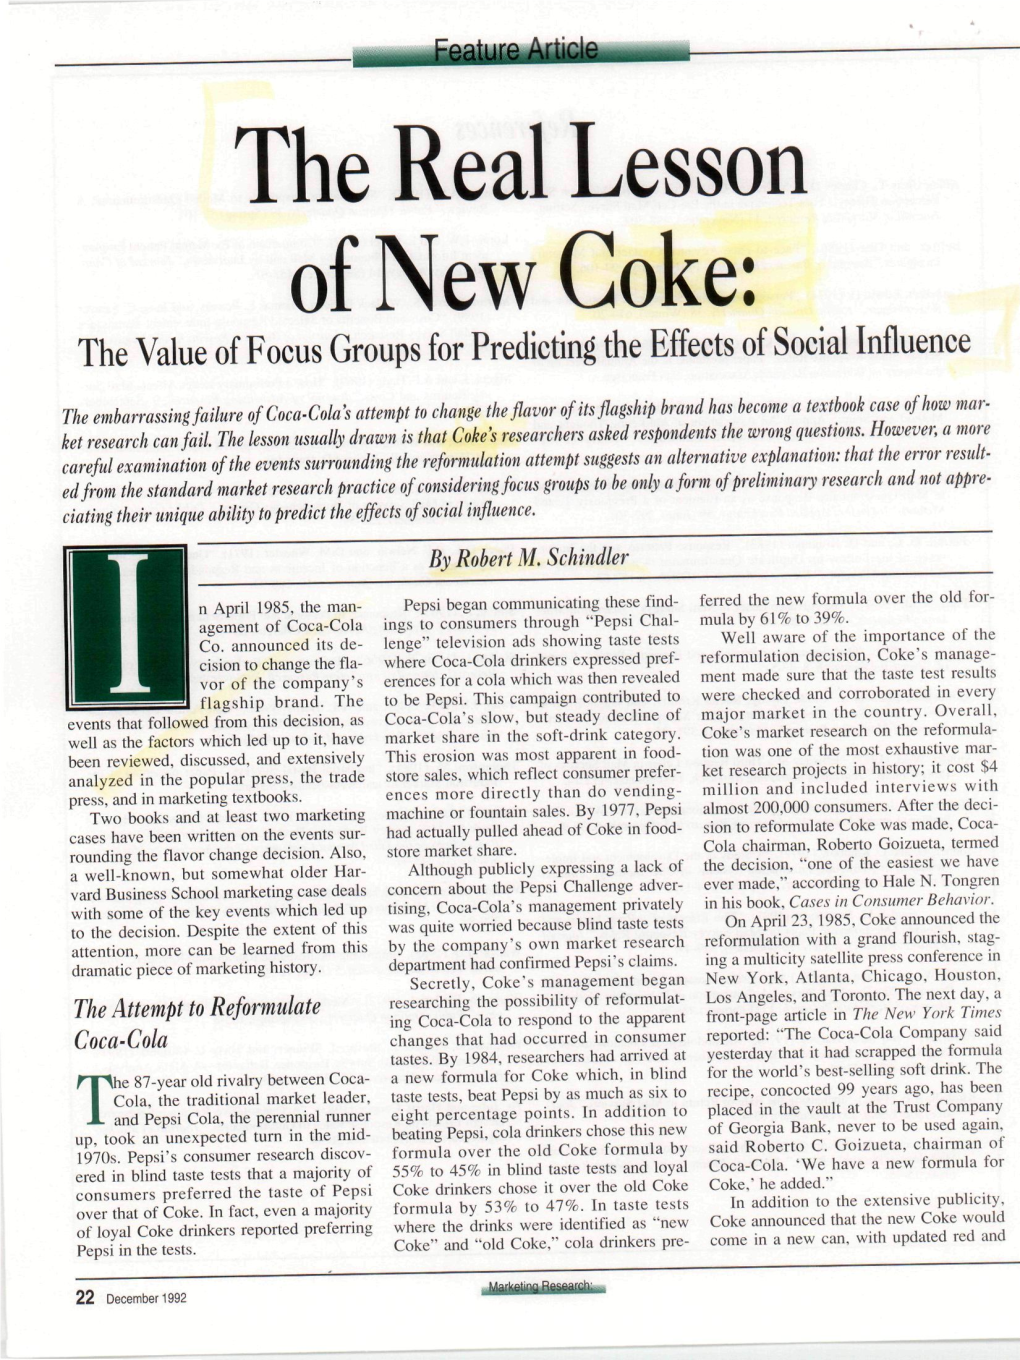 The Real Lesson of New Coke: the Value of Focus Groups for Predicting the Effects of Social Influence